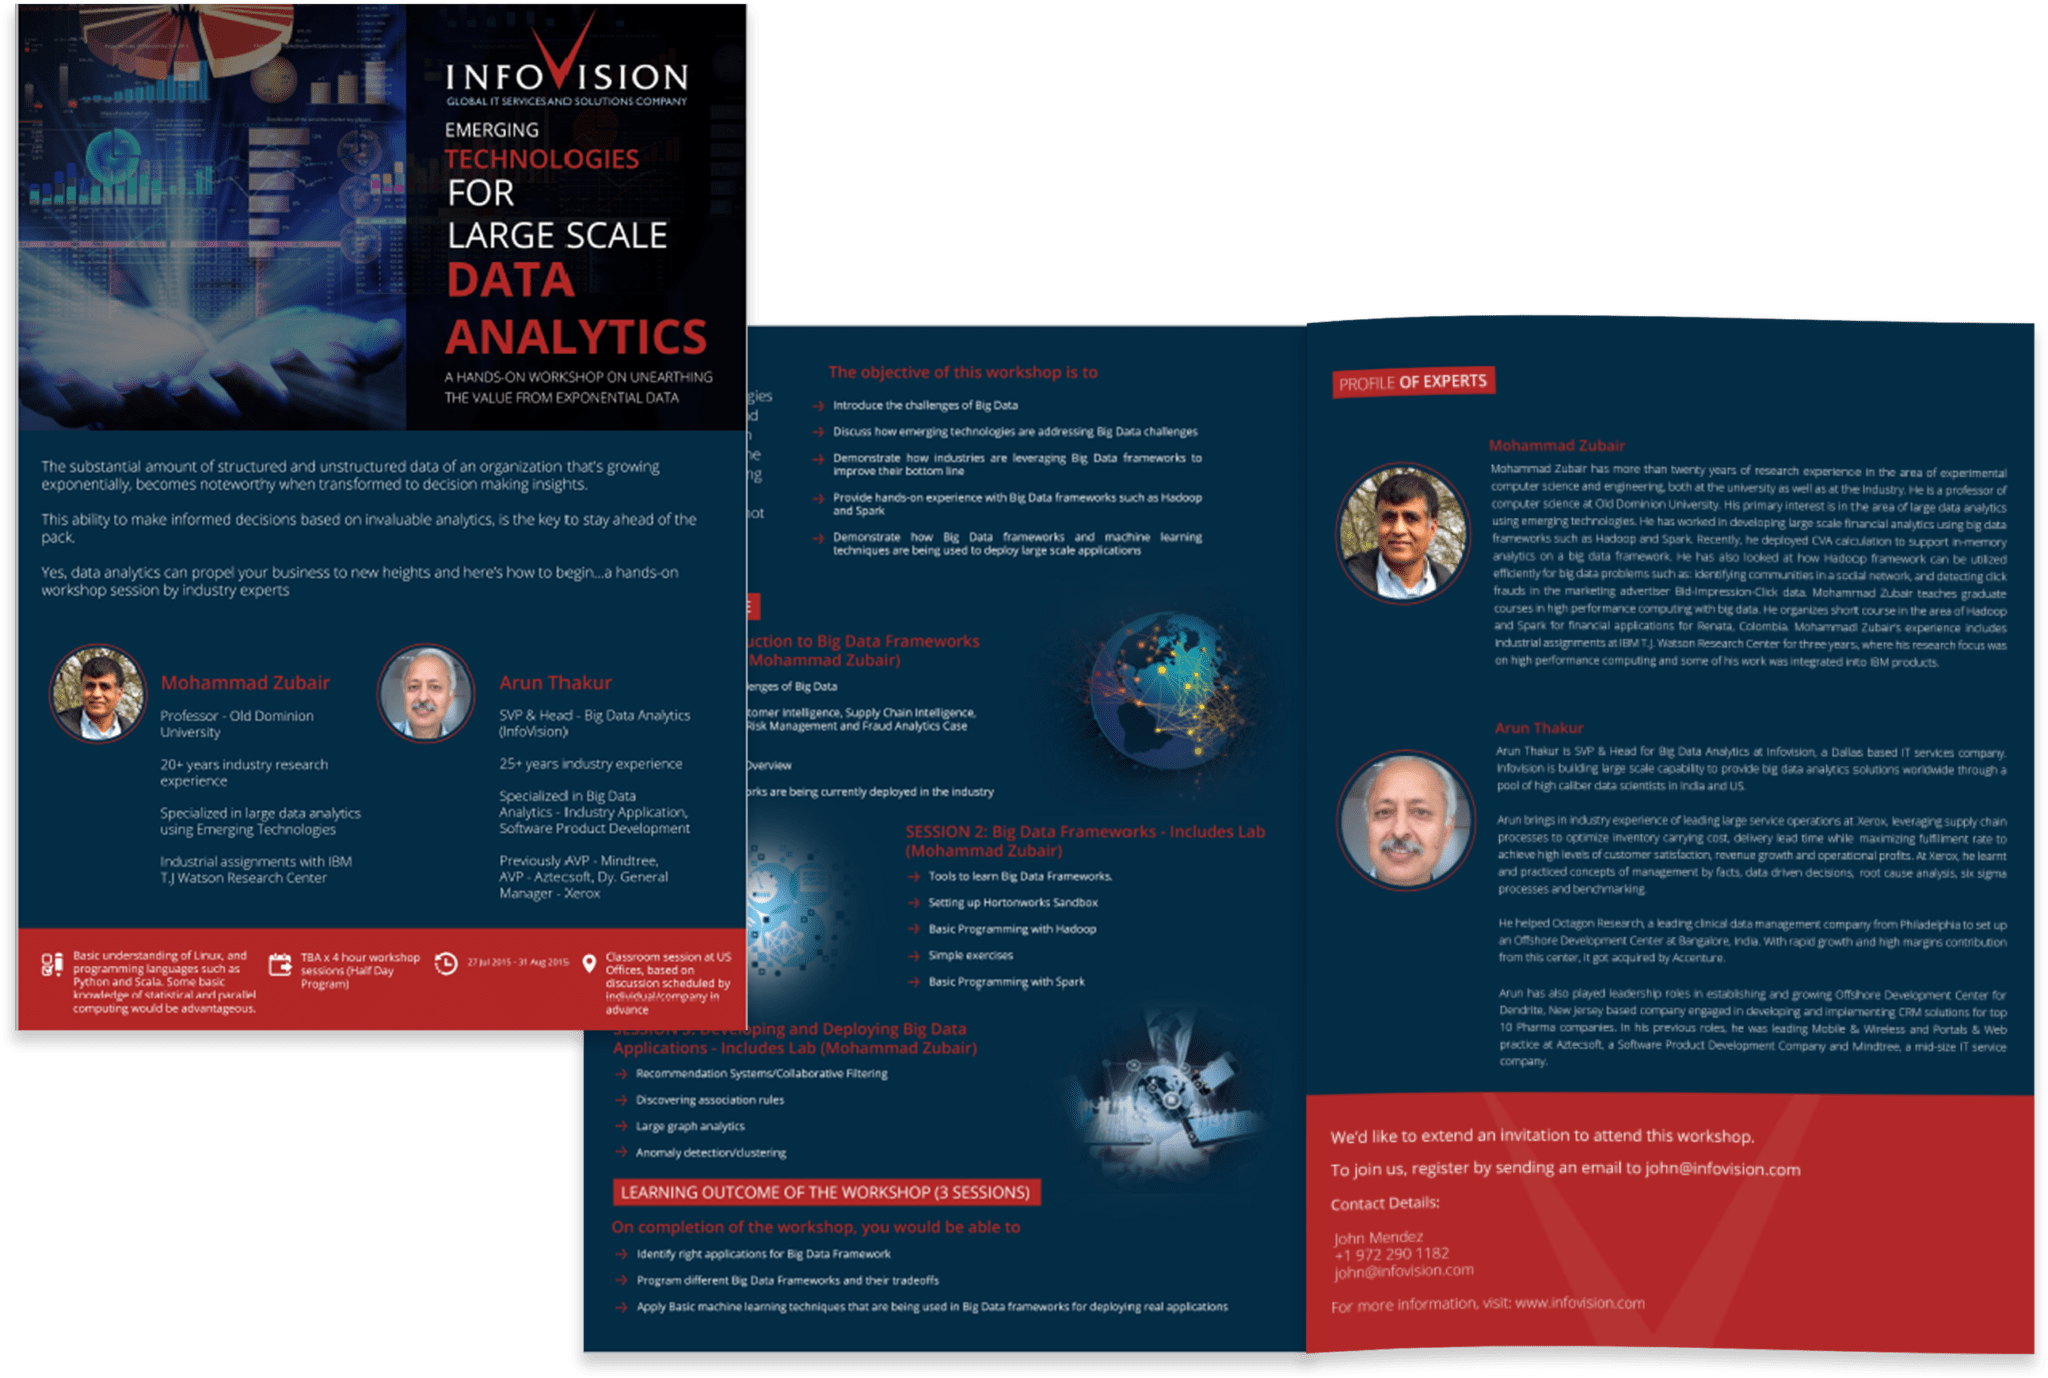 Brochure Designed for Infovision for its Data Analytics Bangalore